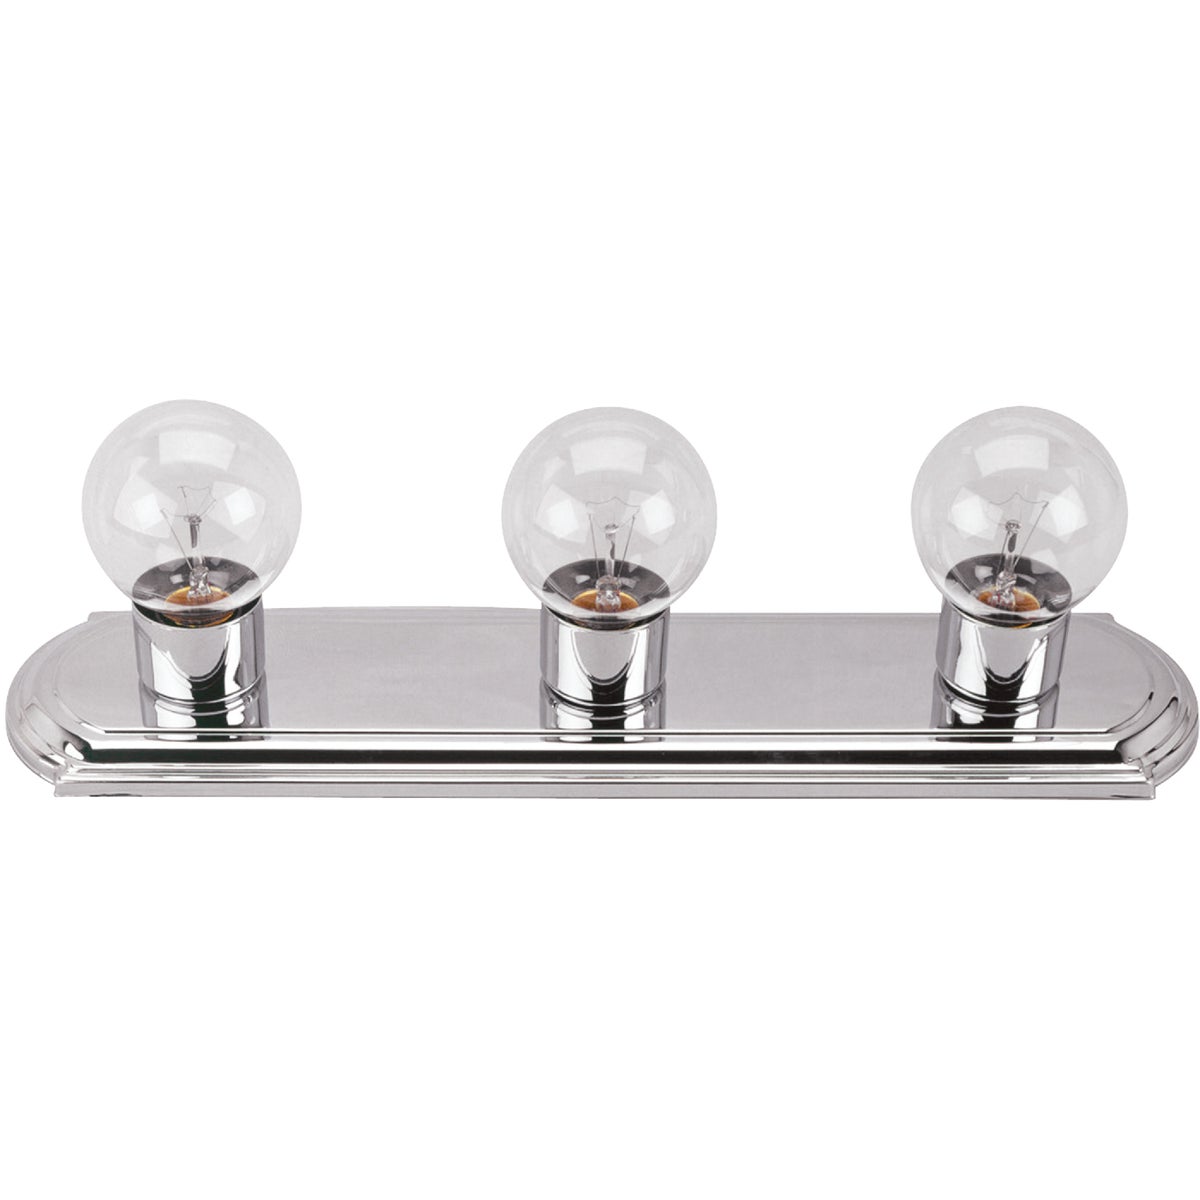 Item 505676, Chrome wall fixture. Features a sleek and contemporary design.